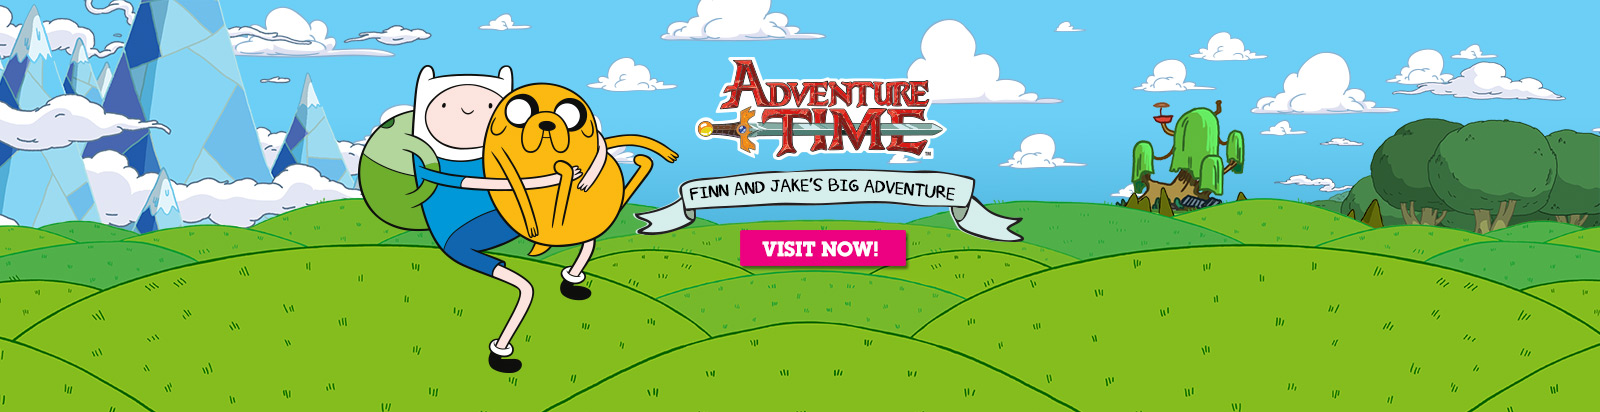 Amazing Adventure Time Pictures & Backgrounds